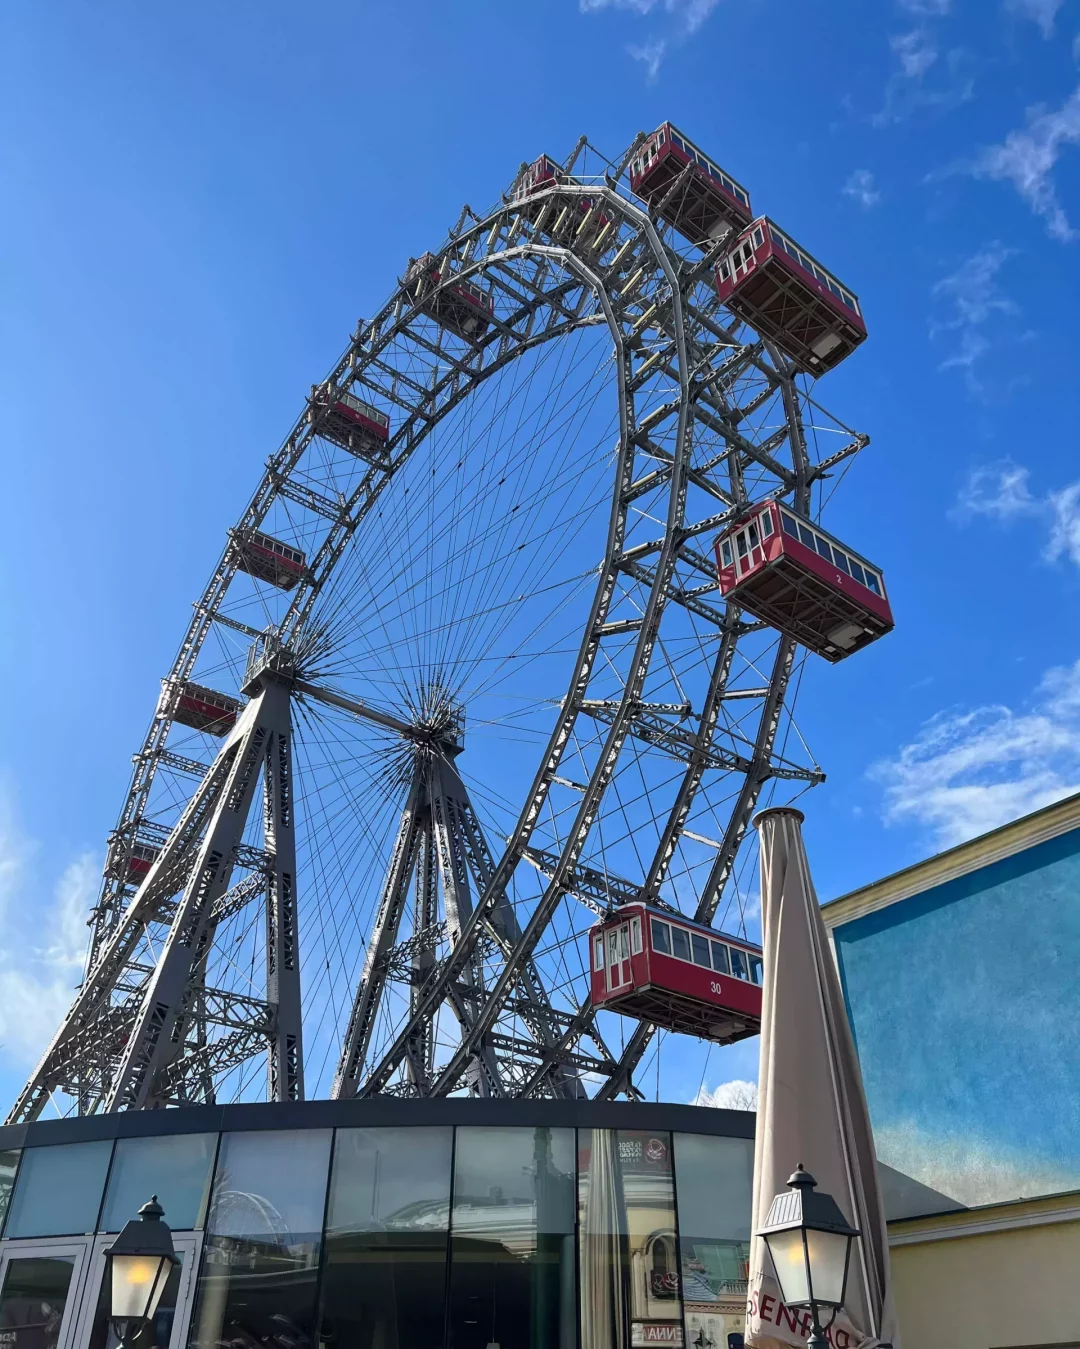 Ride the Giant Ferris Wheel at the Prater Vienna